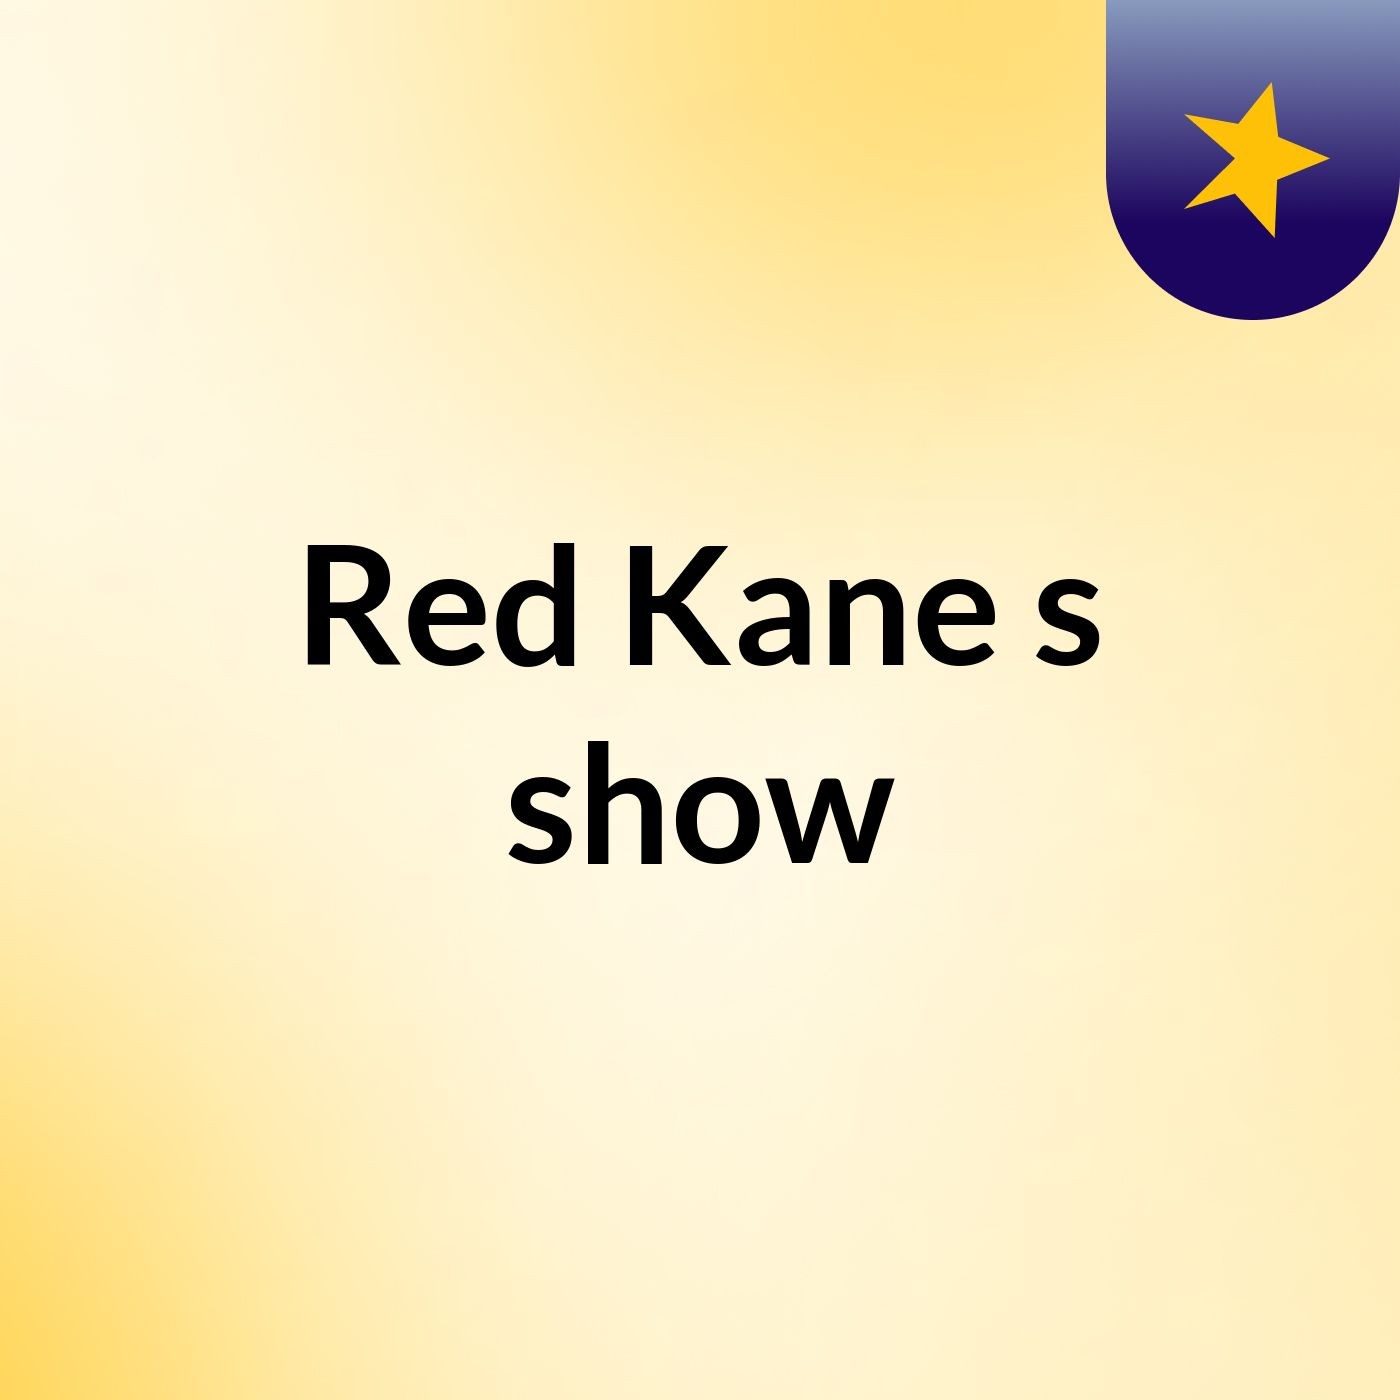 Red Kane's show